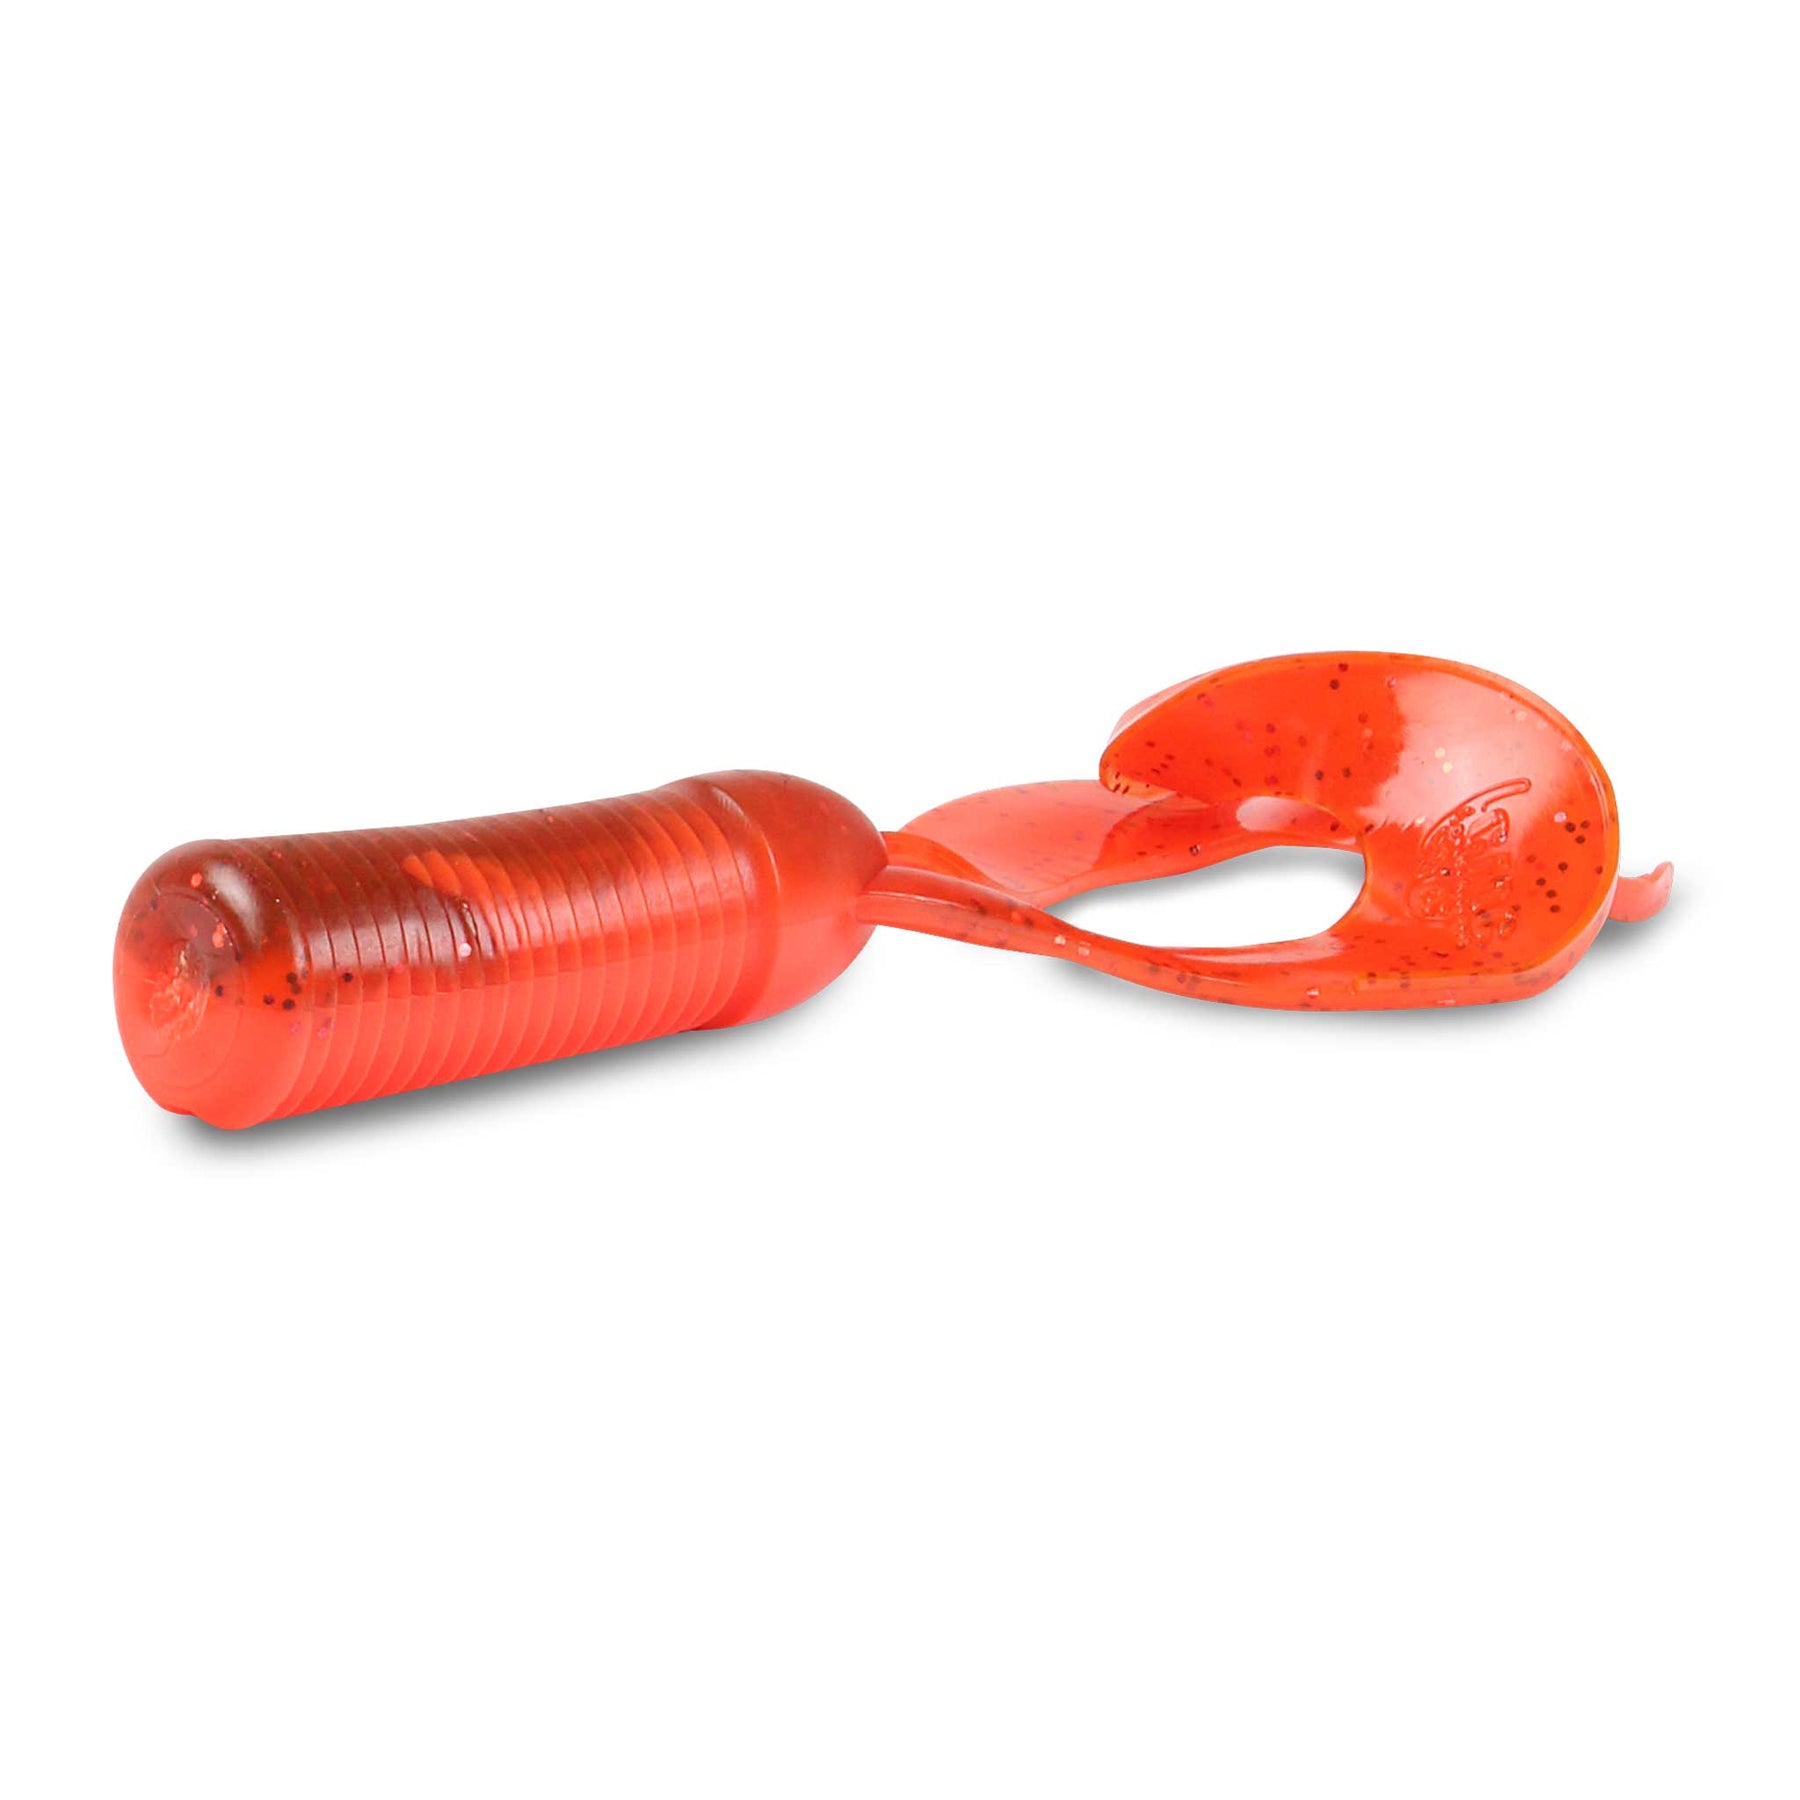 Strike Pro Double Tail Big Tomato Replacement Tails